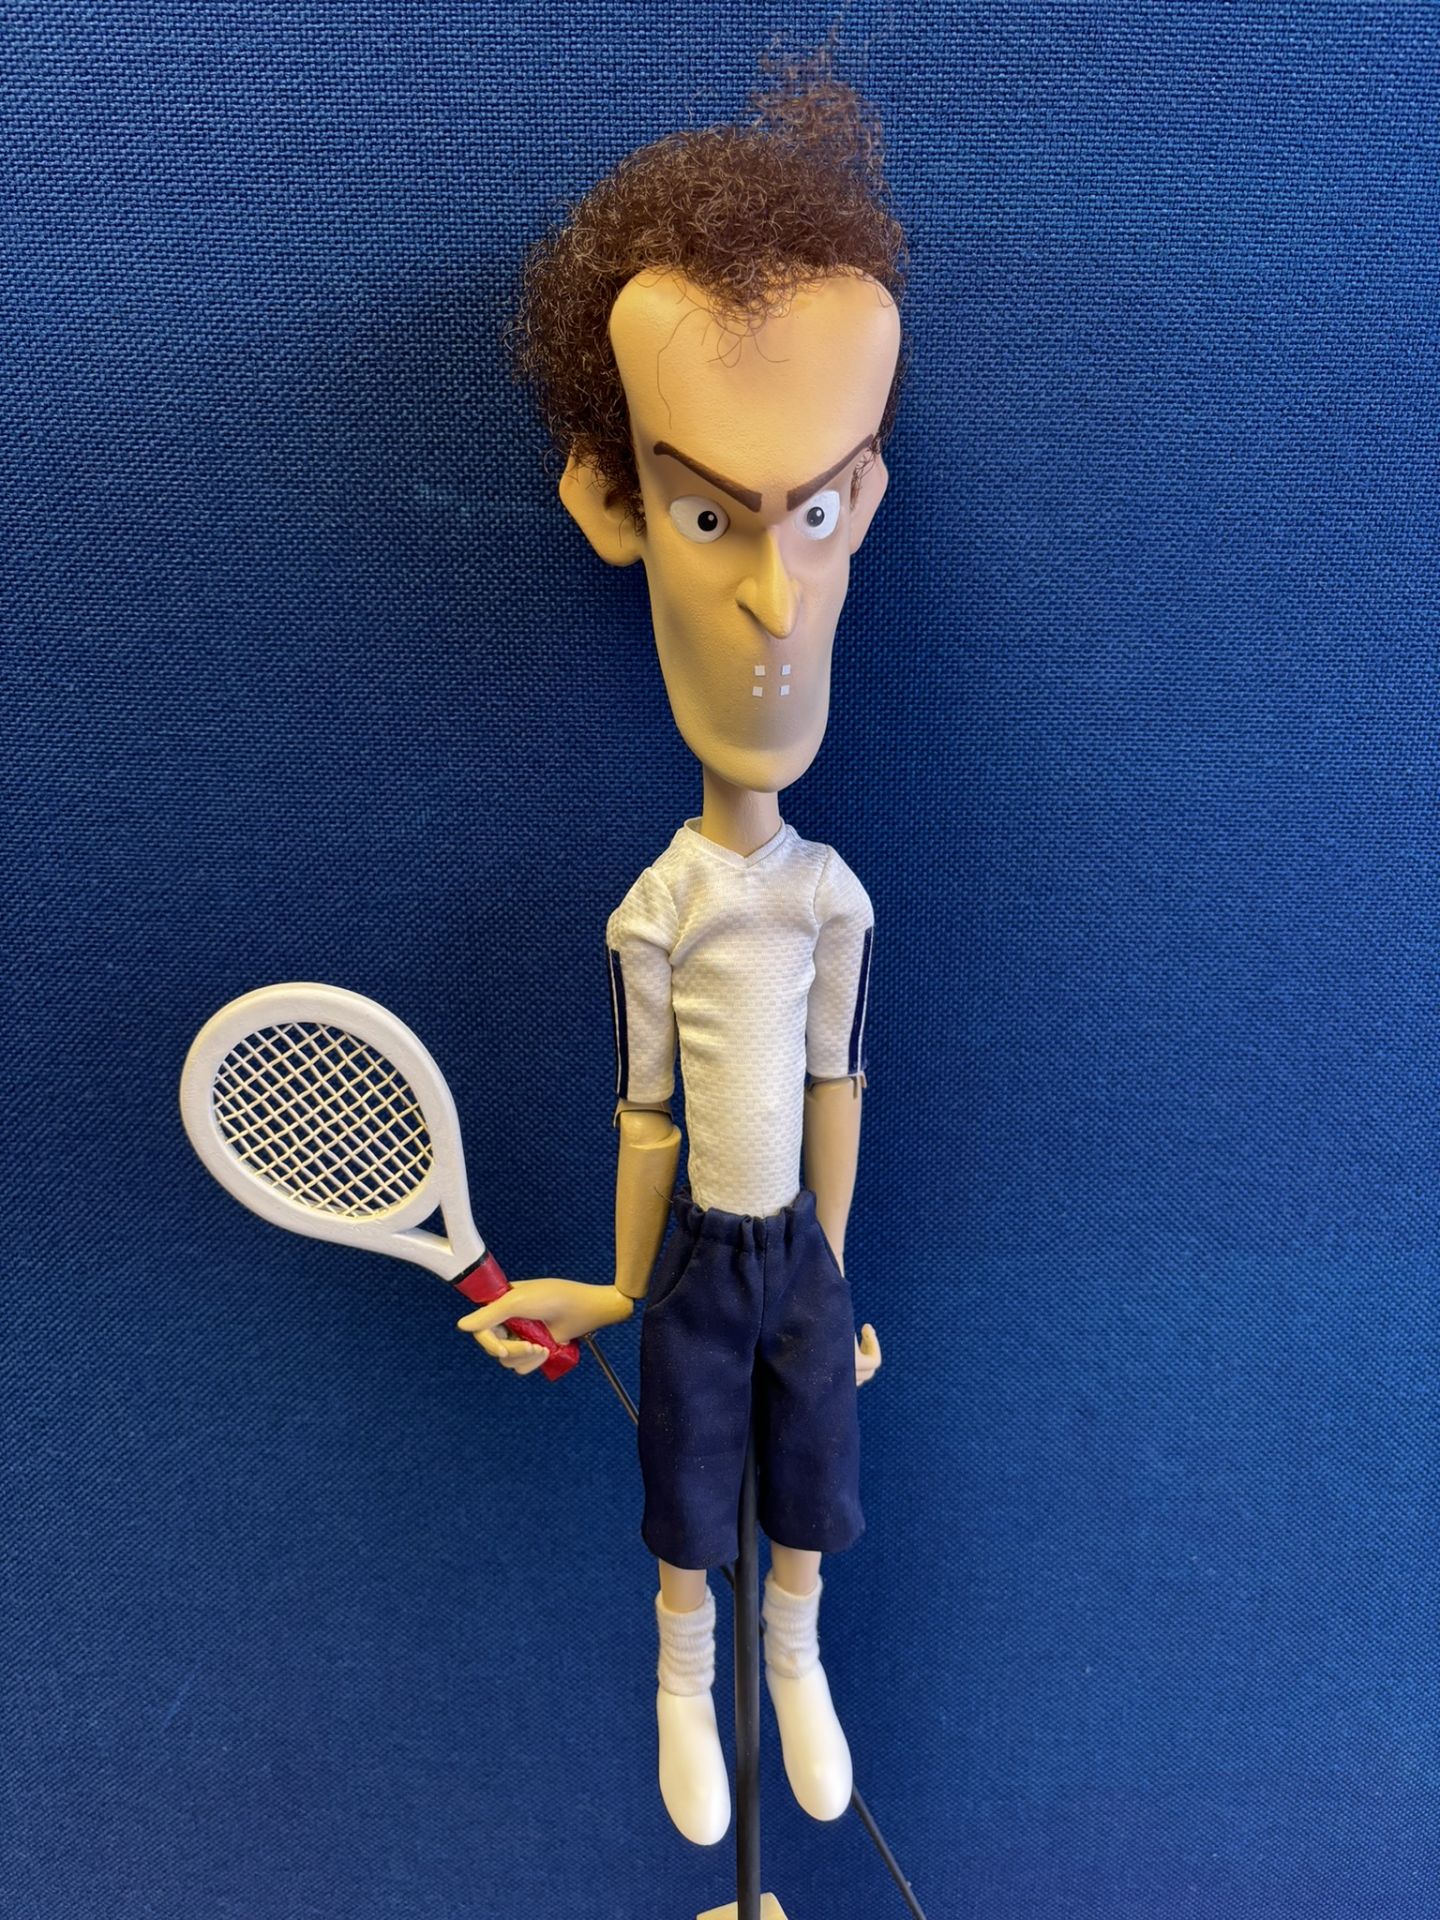 Newzoid puppet - Andy Murray - Image 2 of 3